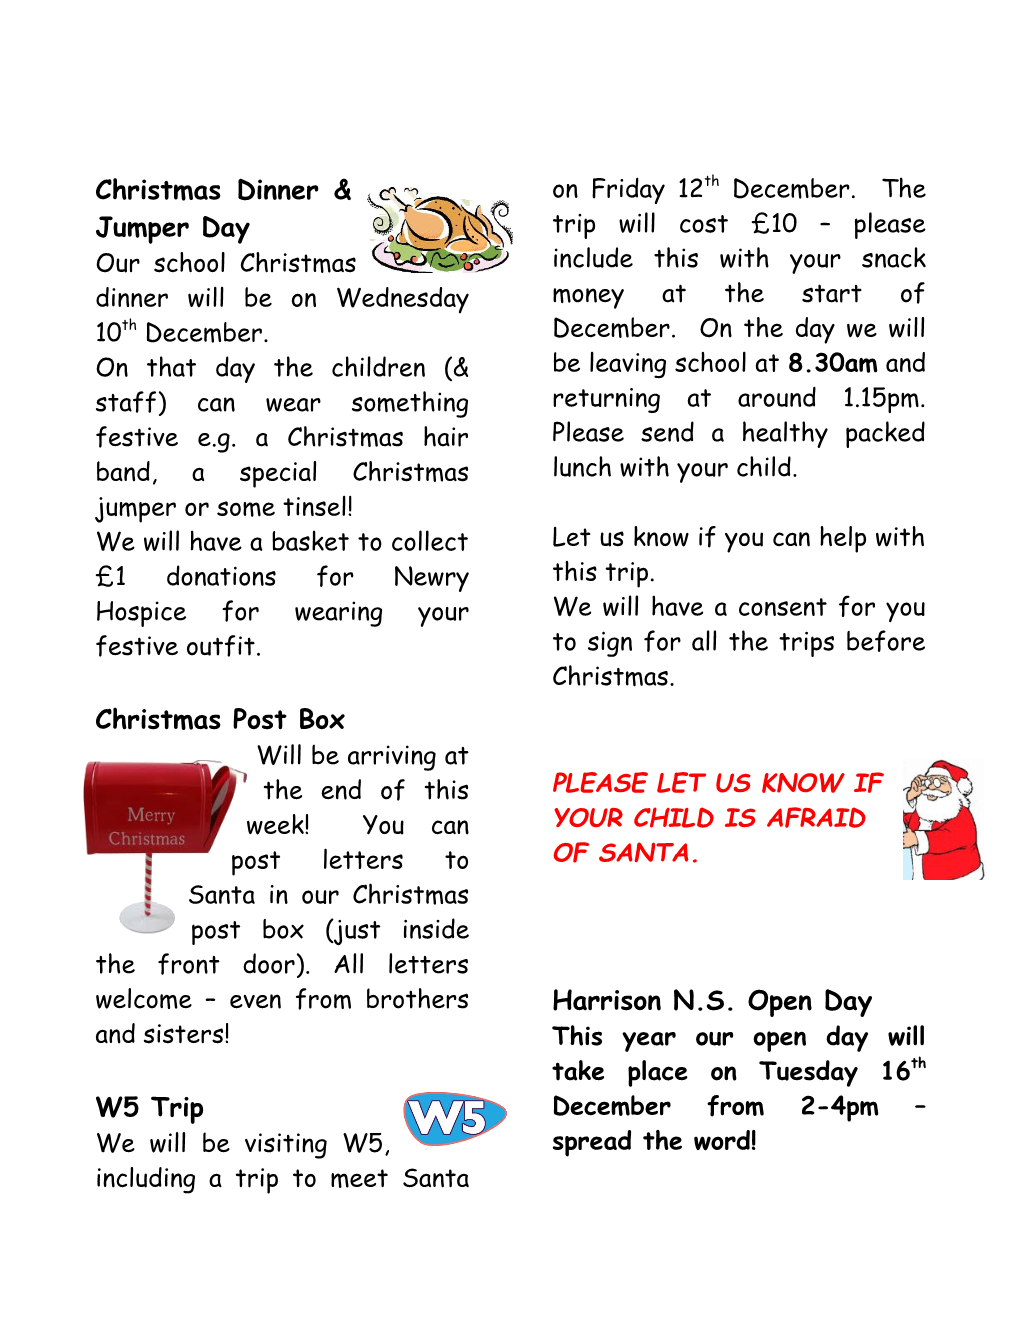 Our School Christmas Dinner Will Be on Wednesday 10Th December